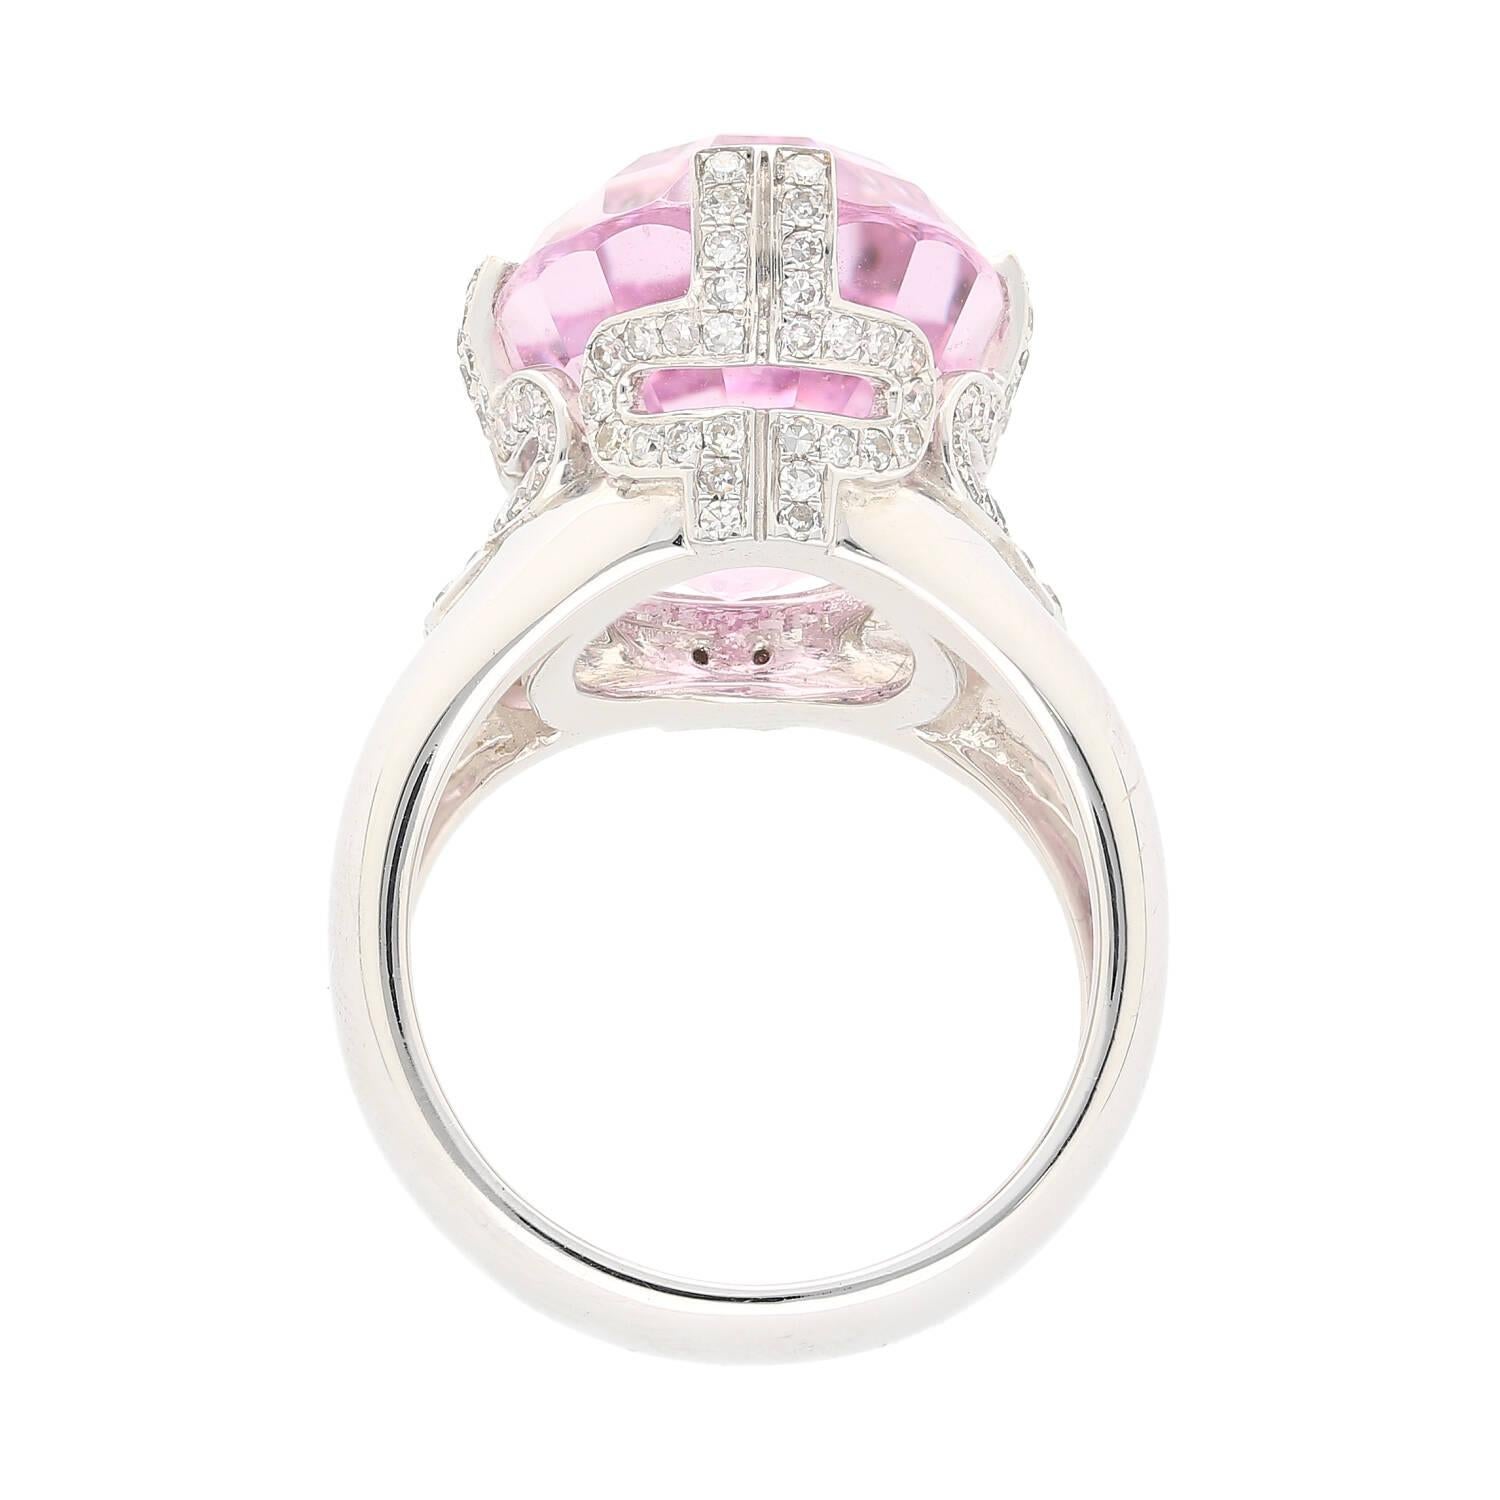 Shop this 20.76 carat oval cut pink Kunzite ring in 18K white gold with 0.66 carats diamond side-stones. This pink oval-cut Kunzite ring is a statement piece designed to capture the heart. Featuring 4 wide prongs that set the center stone with a